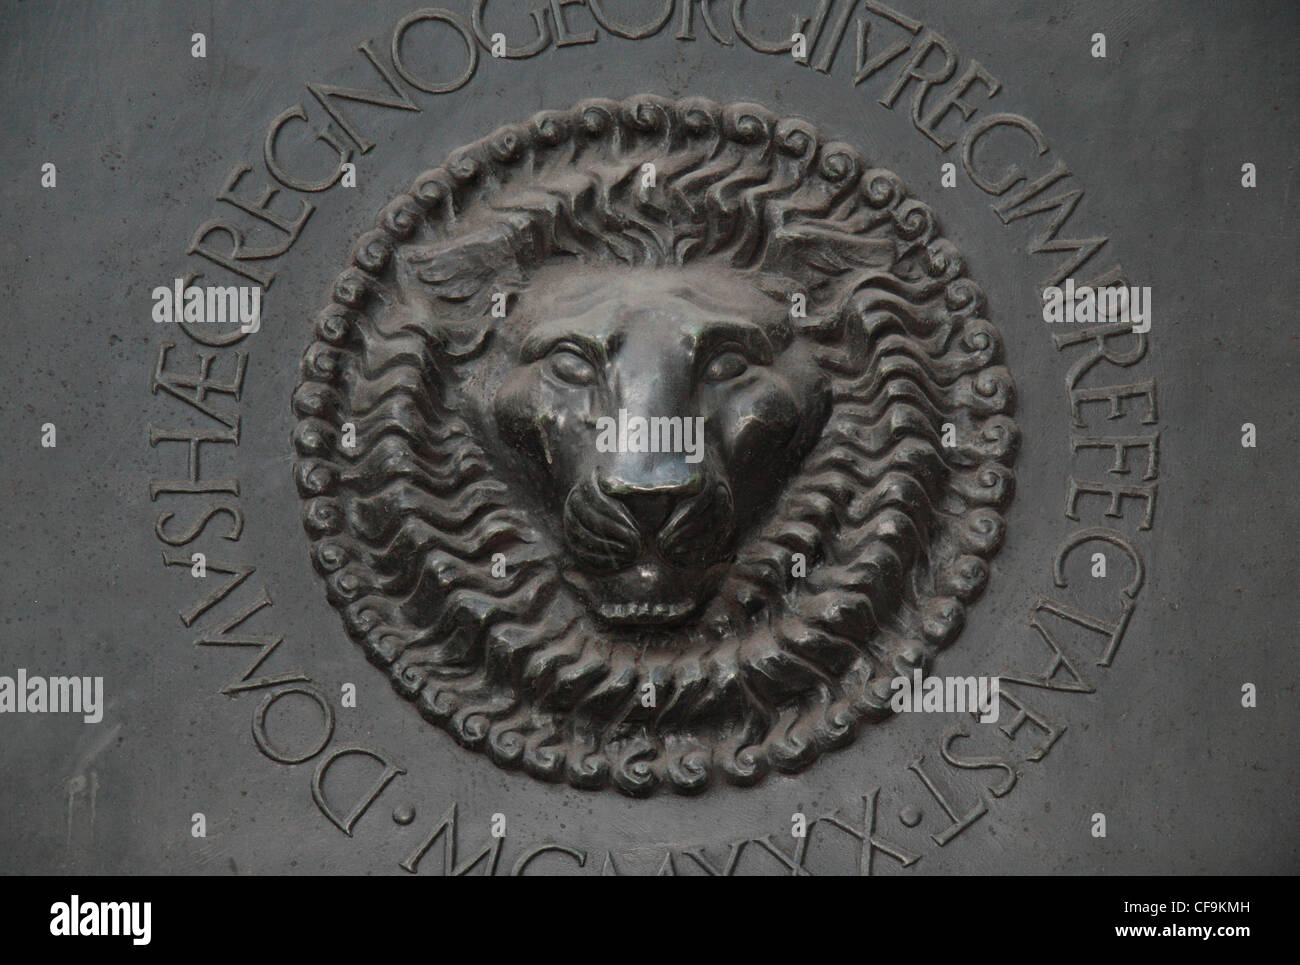 Lion's face on the main entrance door to the Bank of England in the City of London, England, UK. Stock Photo